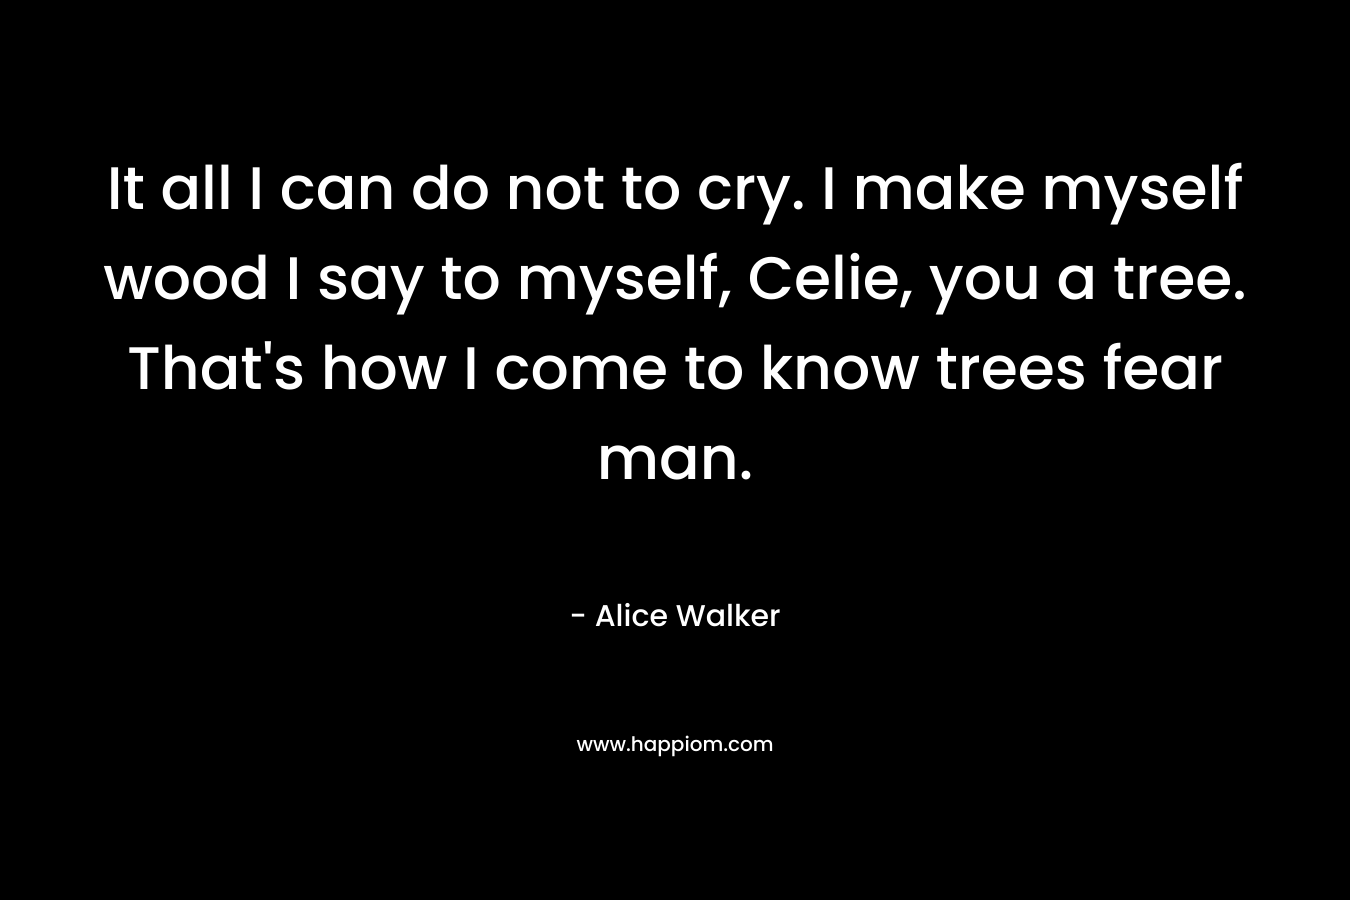 It all I can do not to cry. I make myself wood I say to myself, Celie, you a tree. That’s how I come to know trees fear man. – Alice Walker